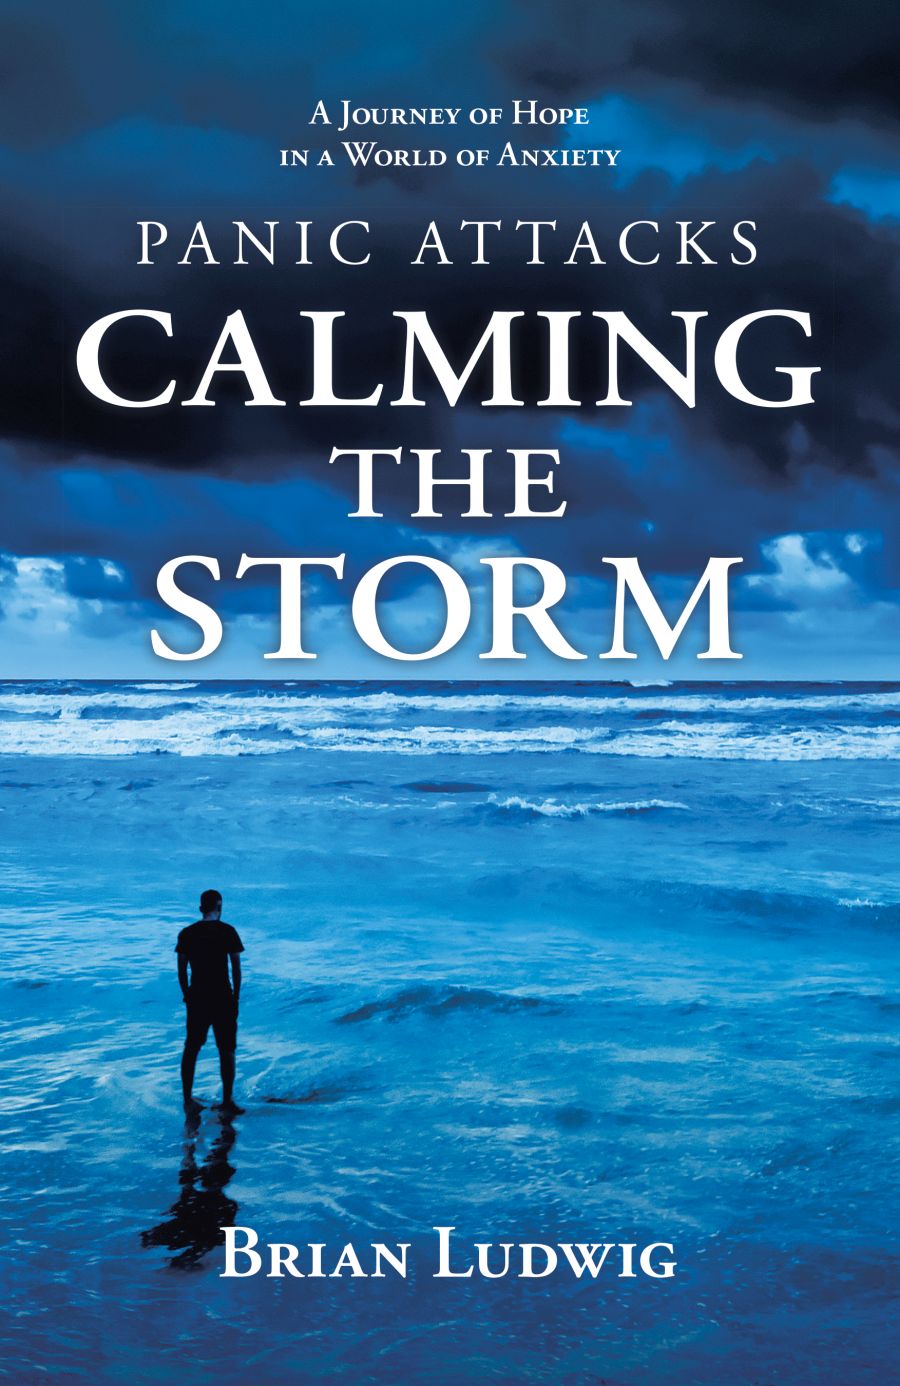 Panic Attacks: Calming the Storm - book author Brian Ludwig